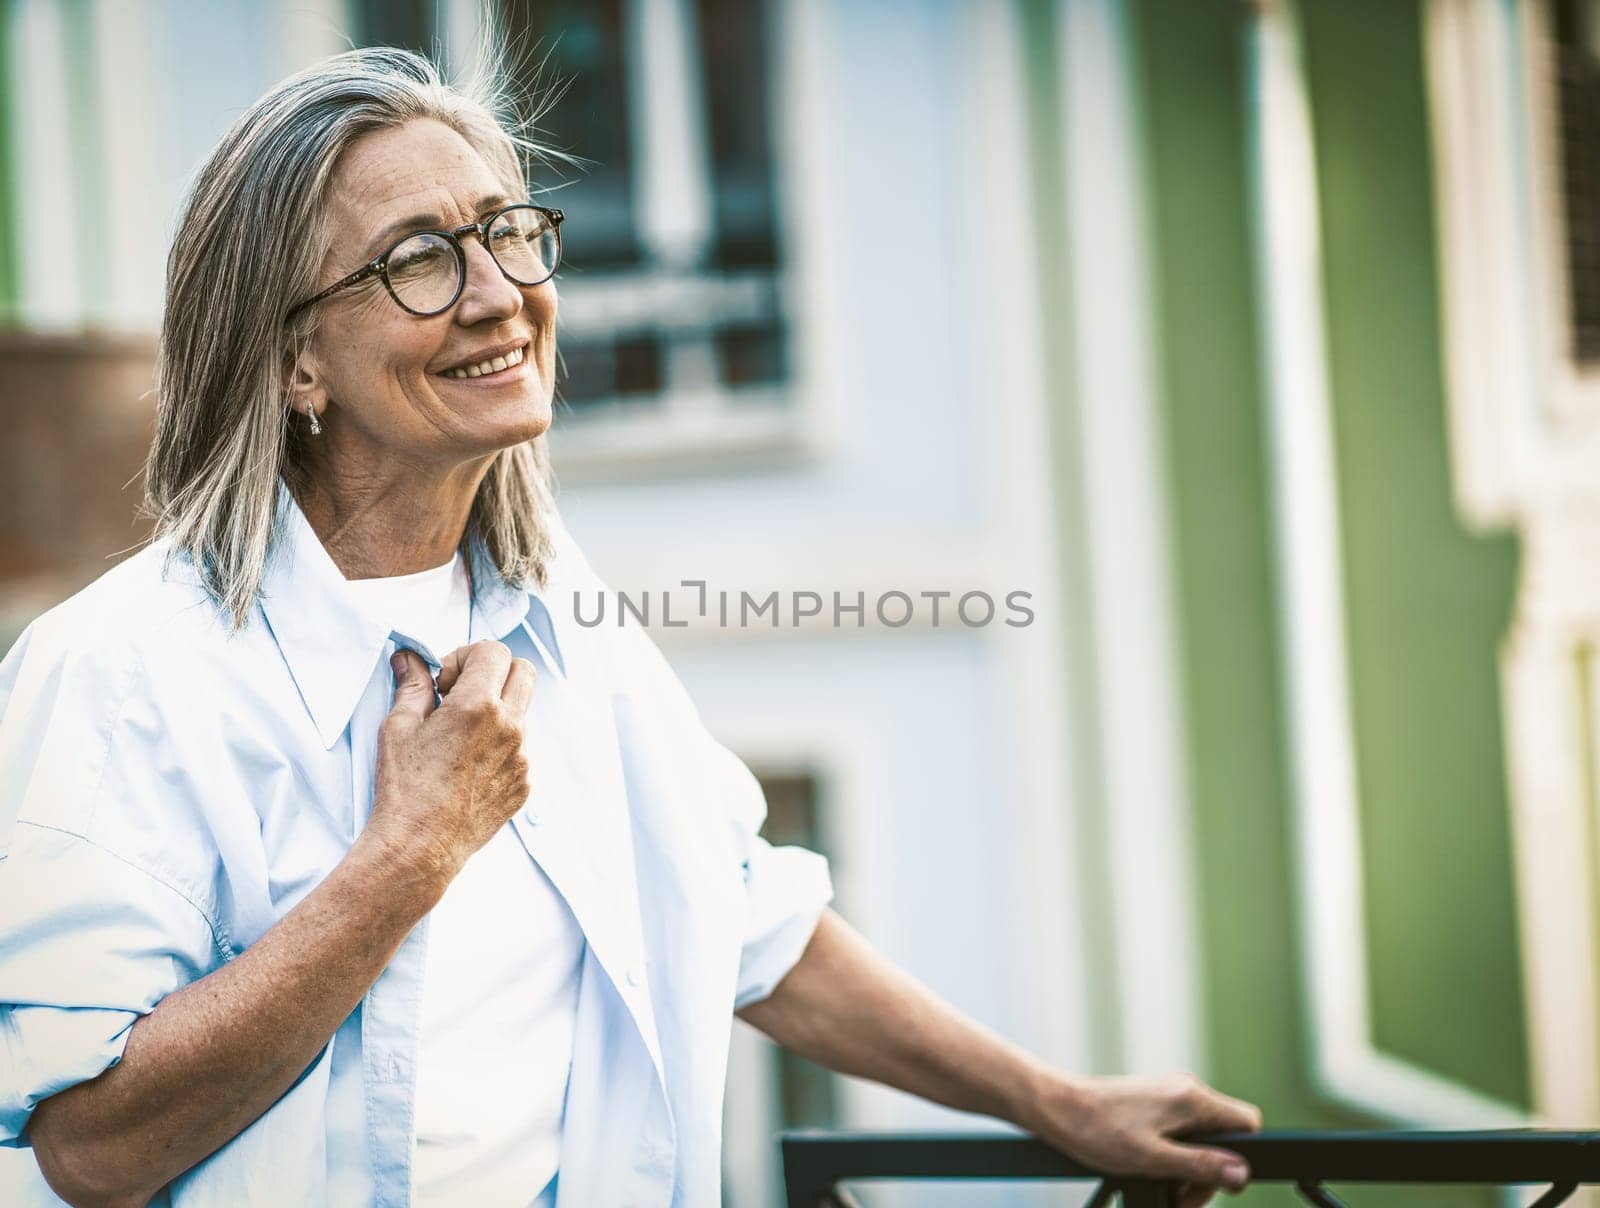 Happiness in old age, mature woman with radiant smile standing on balcony overlooking old street in Europe. Senior lady in joyful and contented state, embracing beauty of aging gracefully. High quality photo